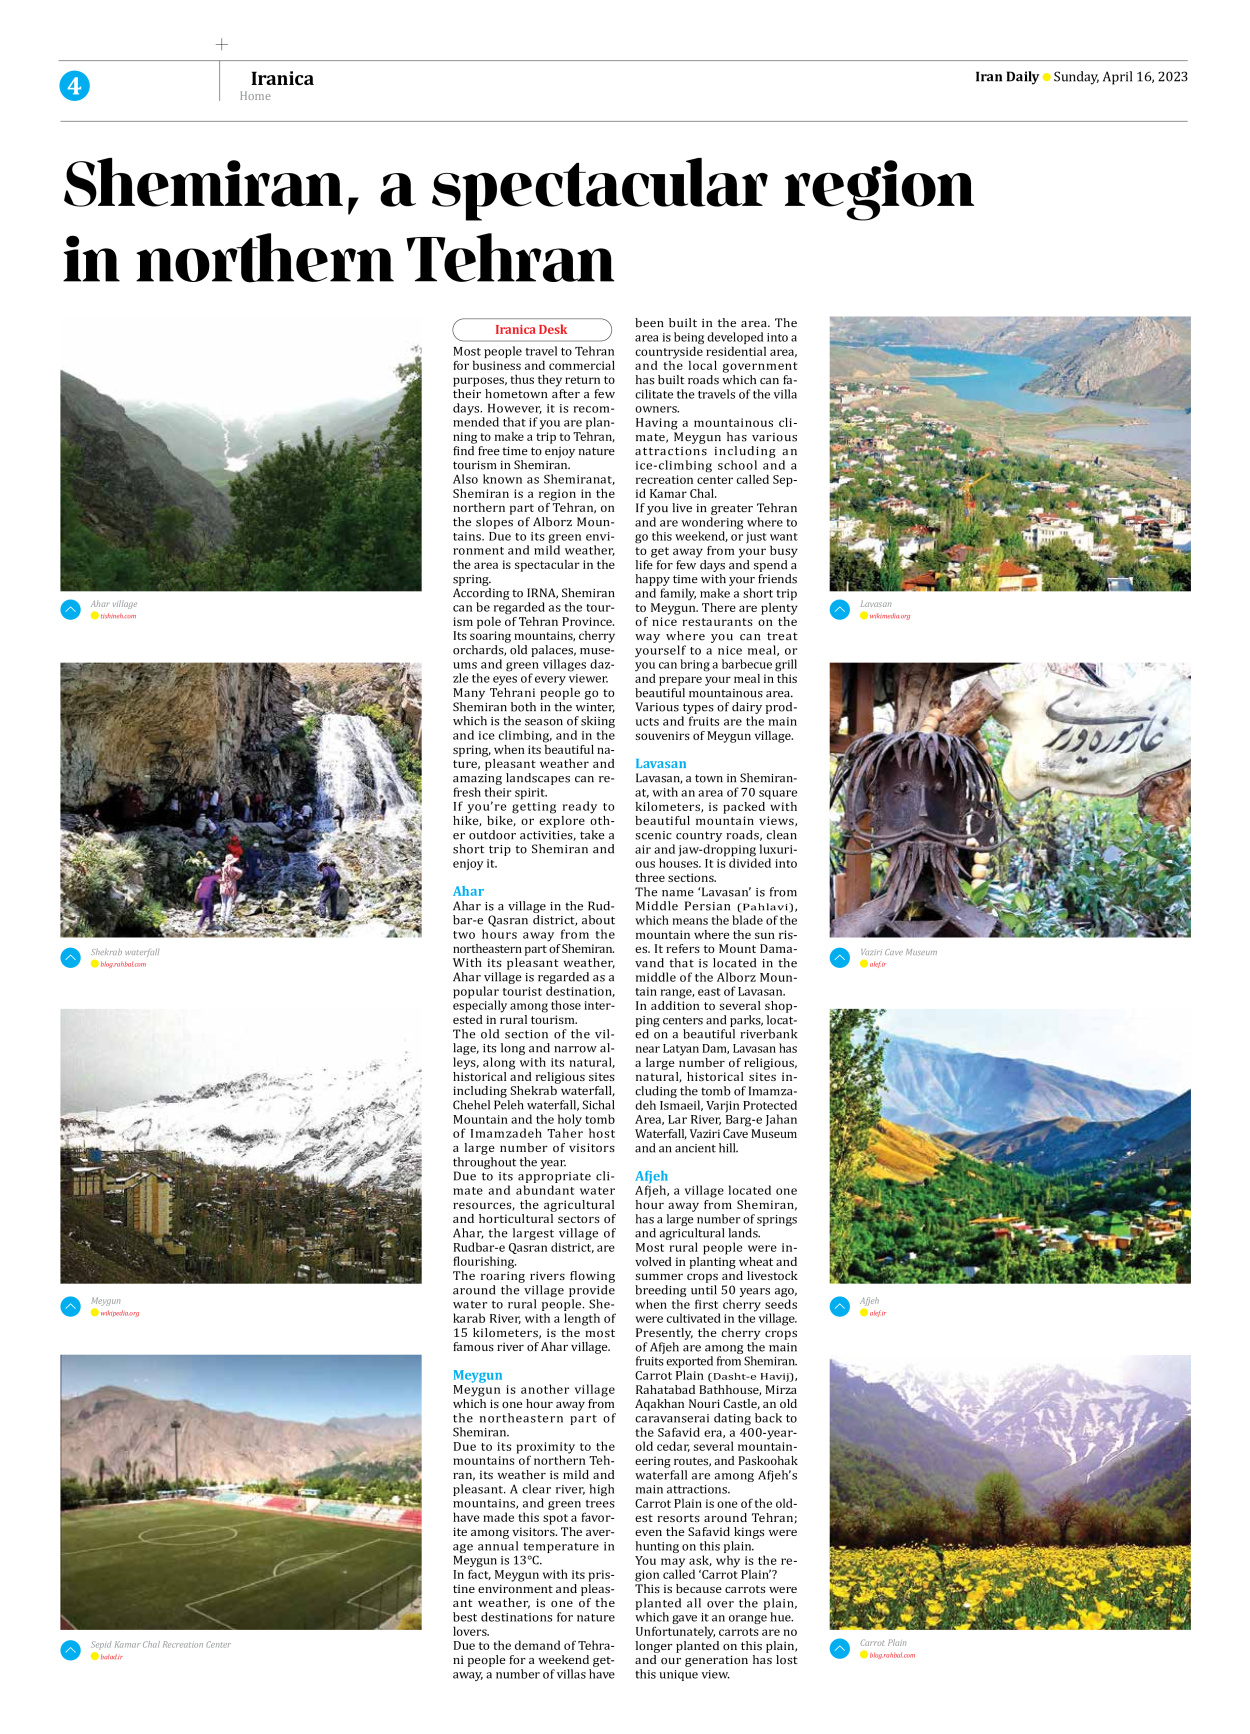 Iran Daily - Number Seven Thousand Two Hundred and Sixty Nine - 16 April 2023 - Page 4